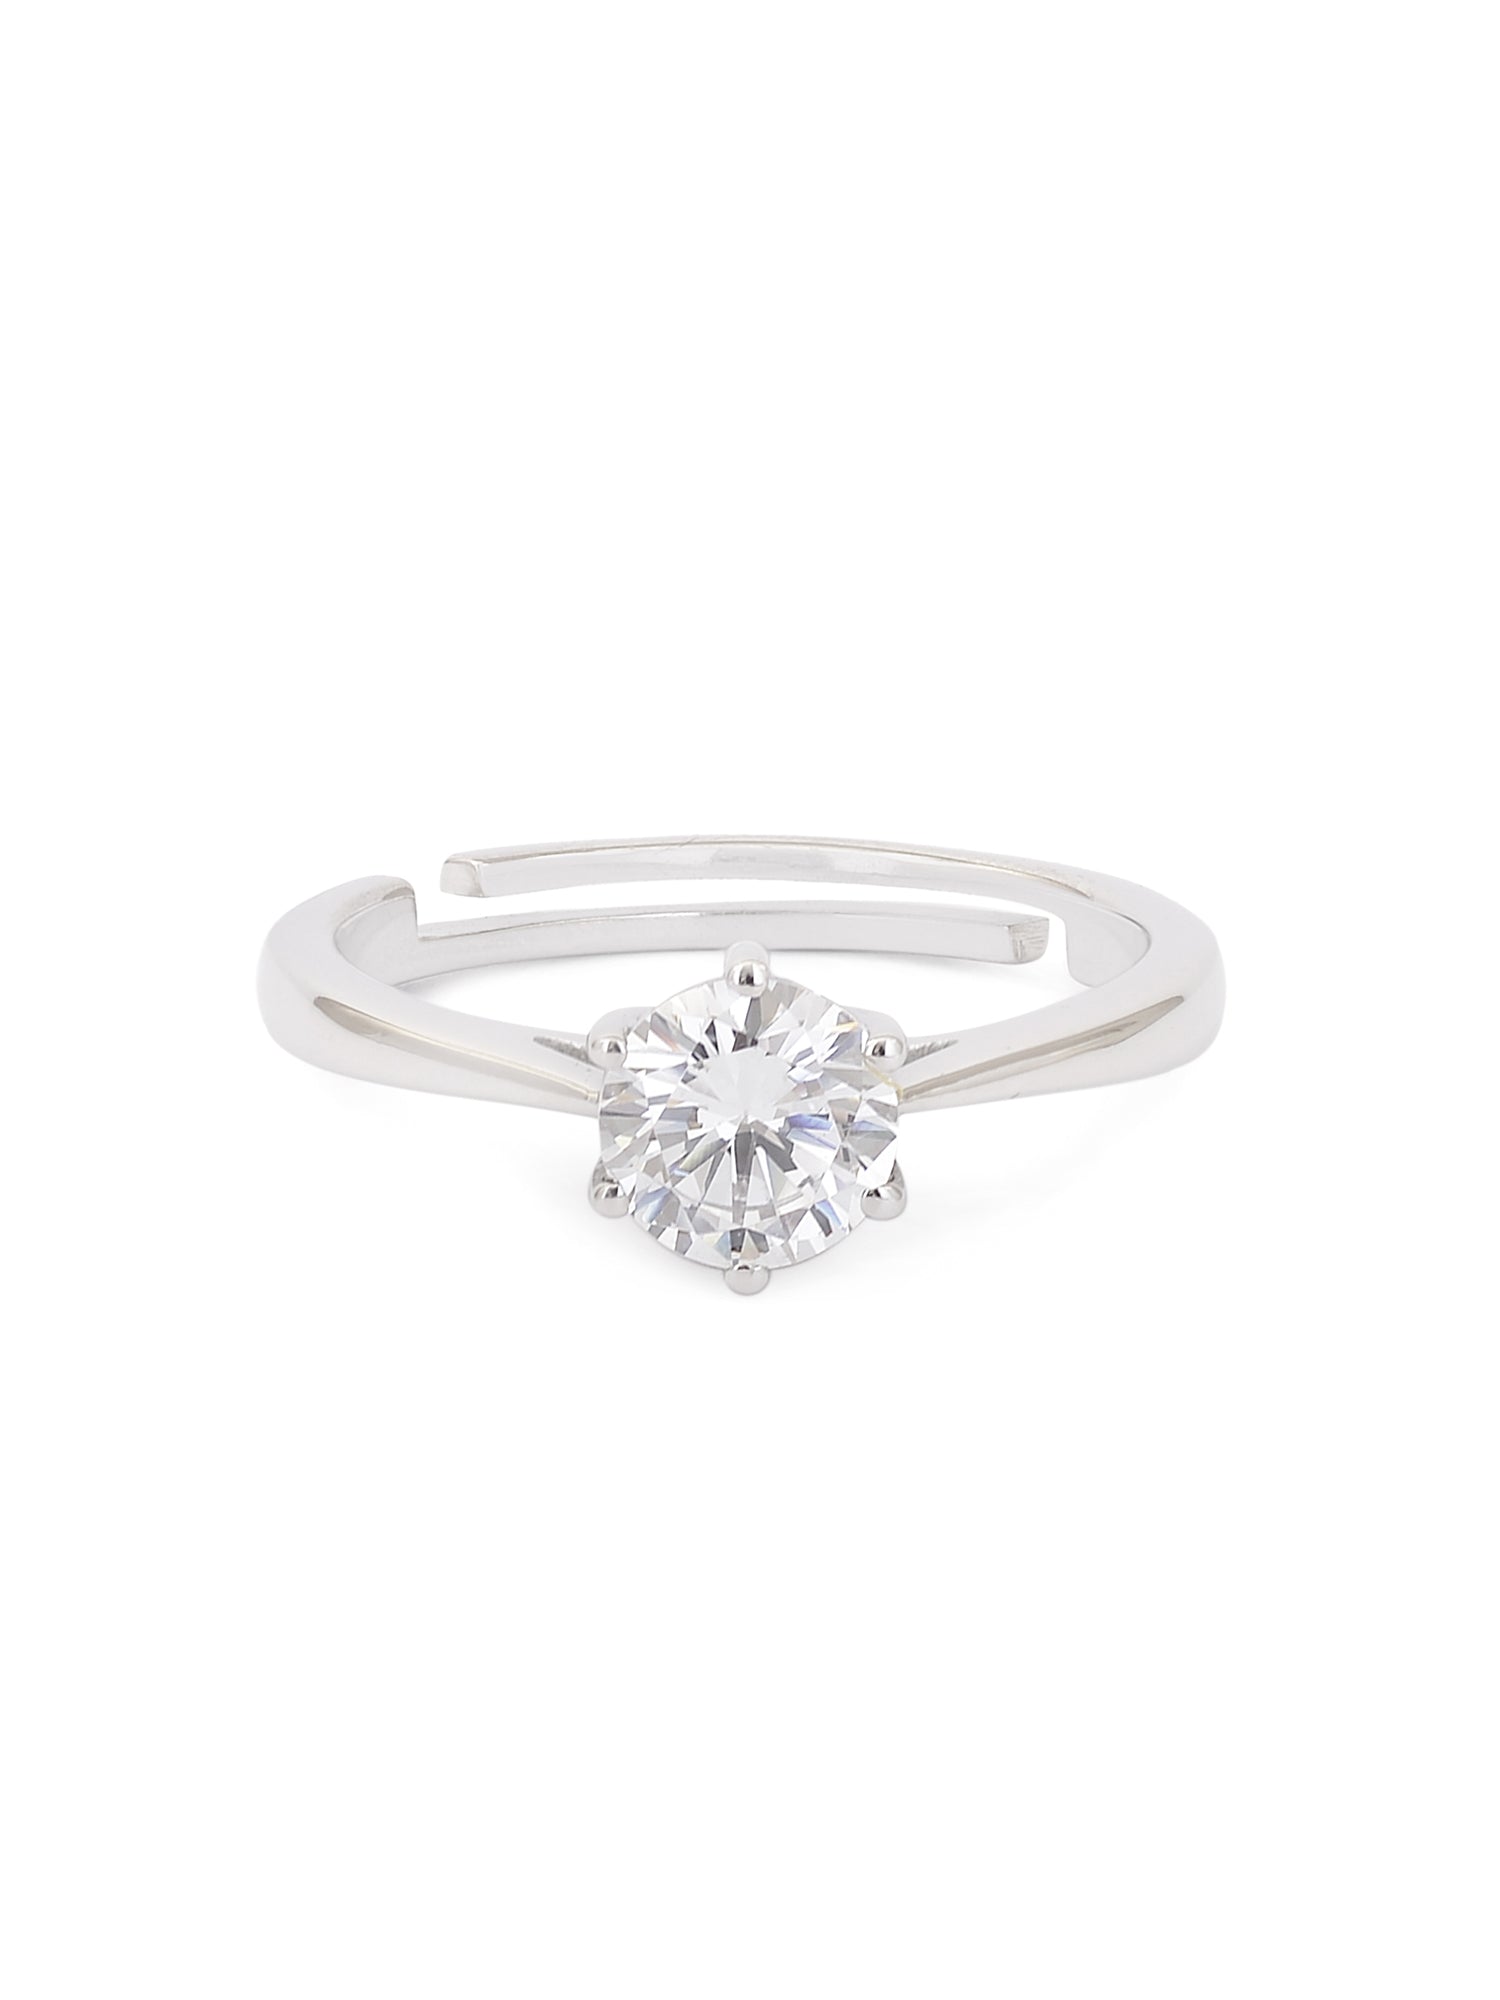 1.5 CARAT ADJUSTABLE SILVER SOLITAIRE RING FOR WOMEN-3